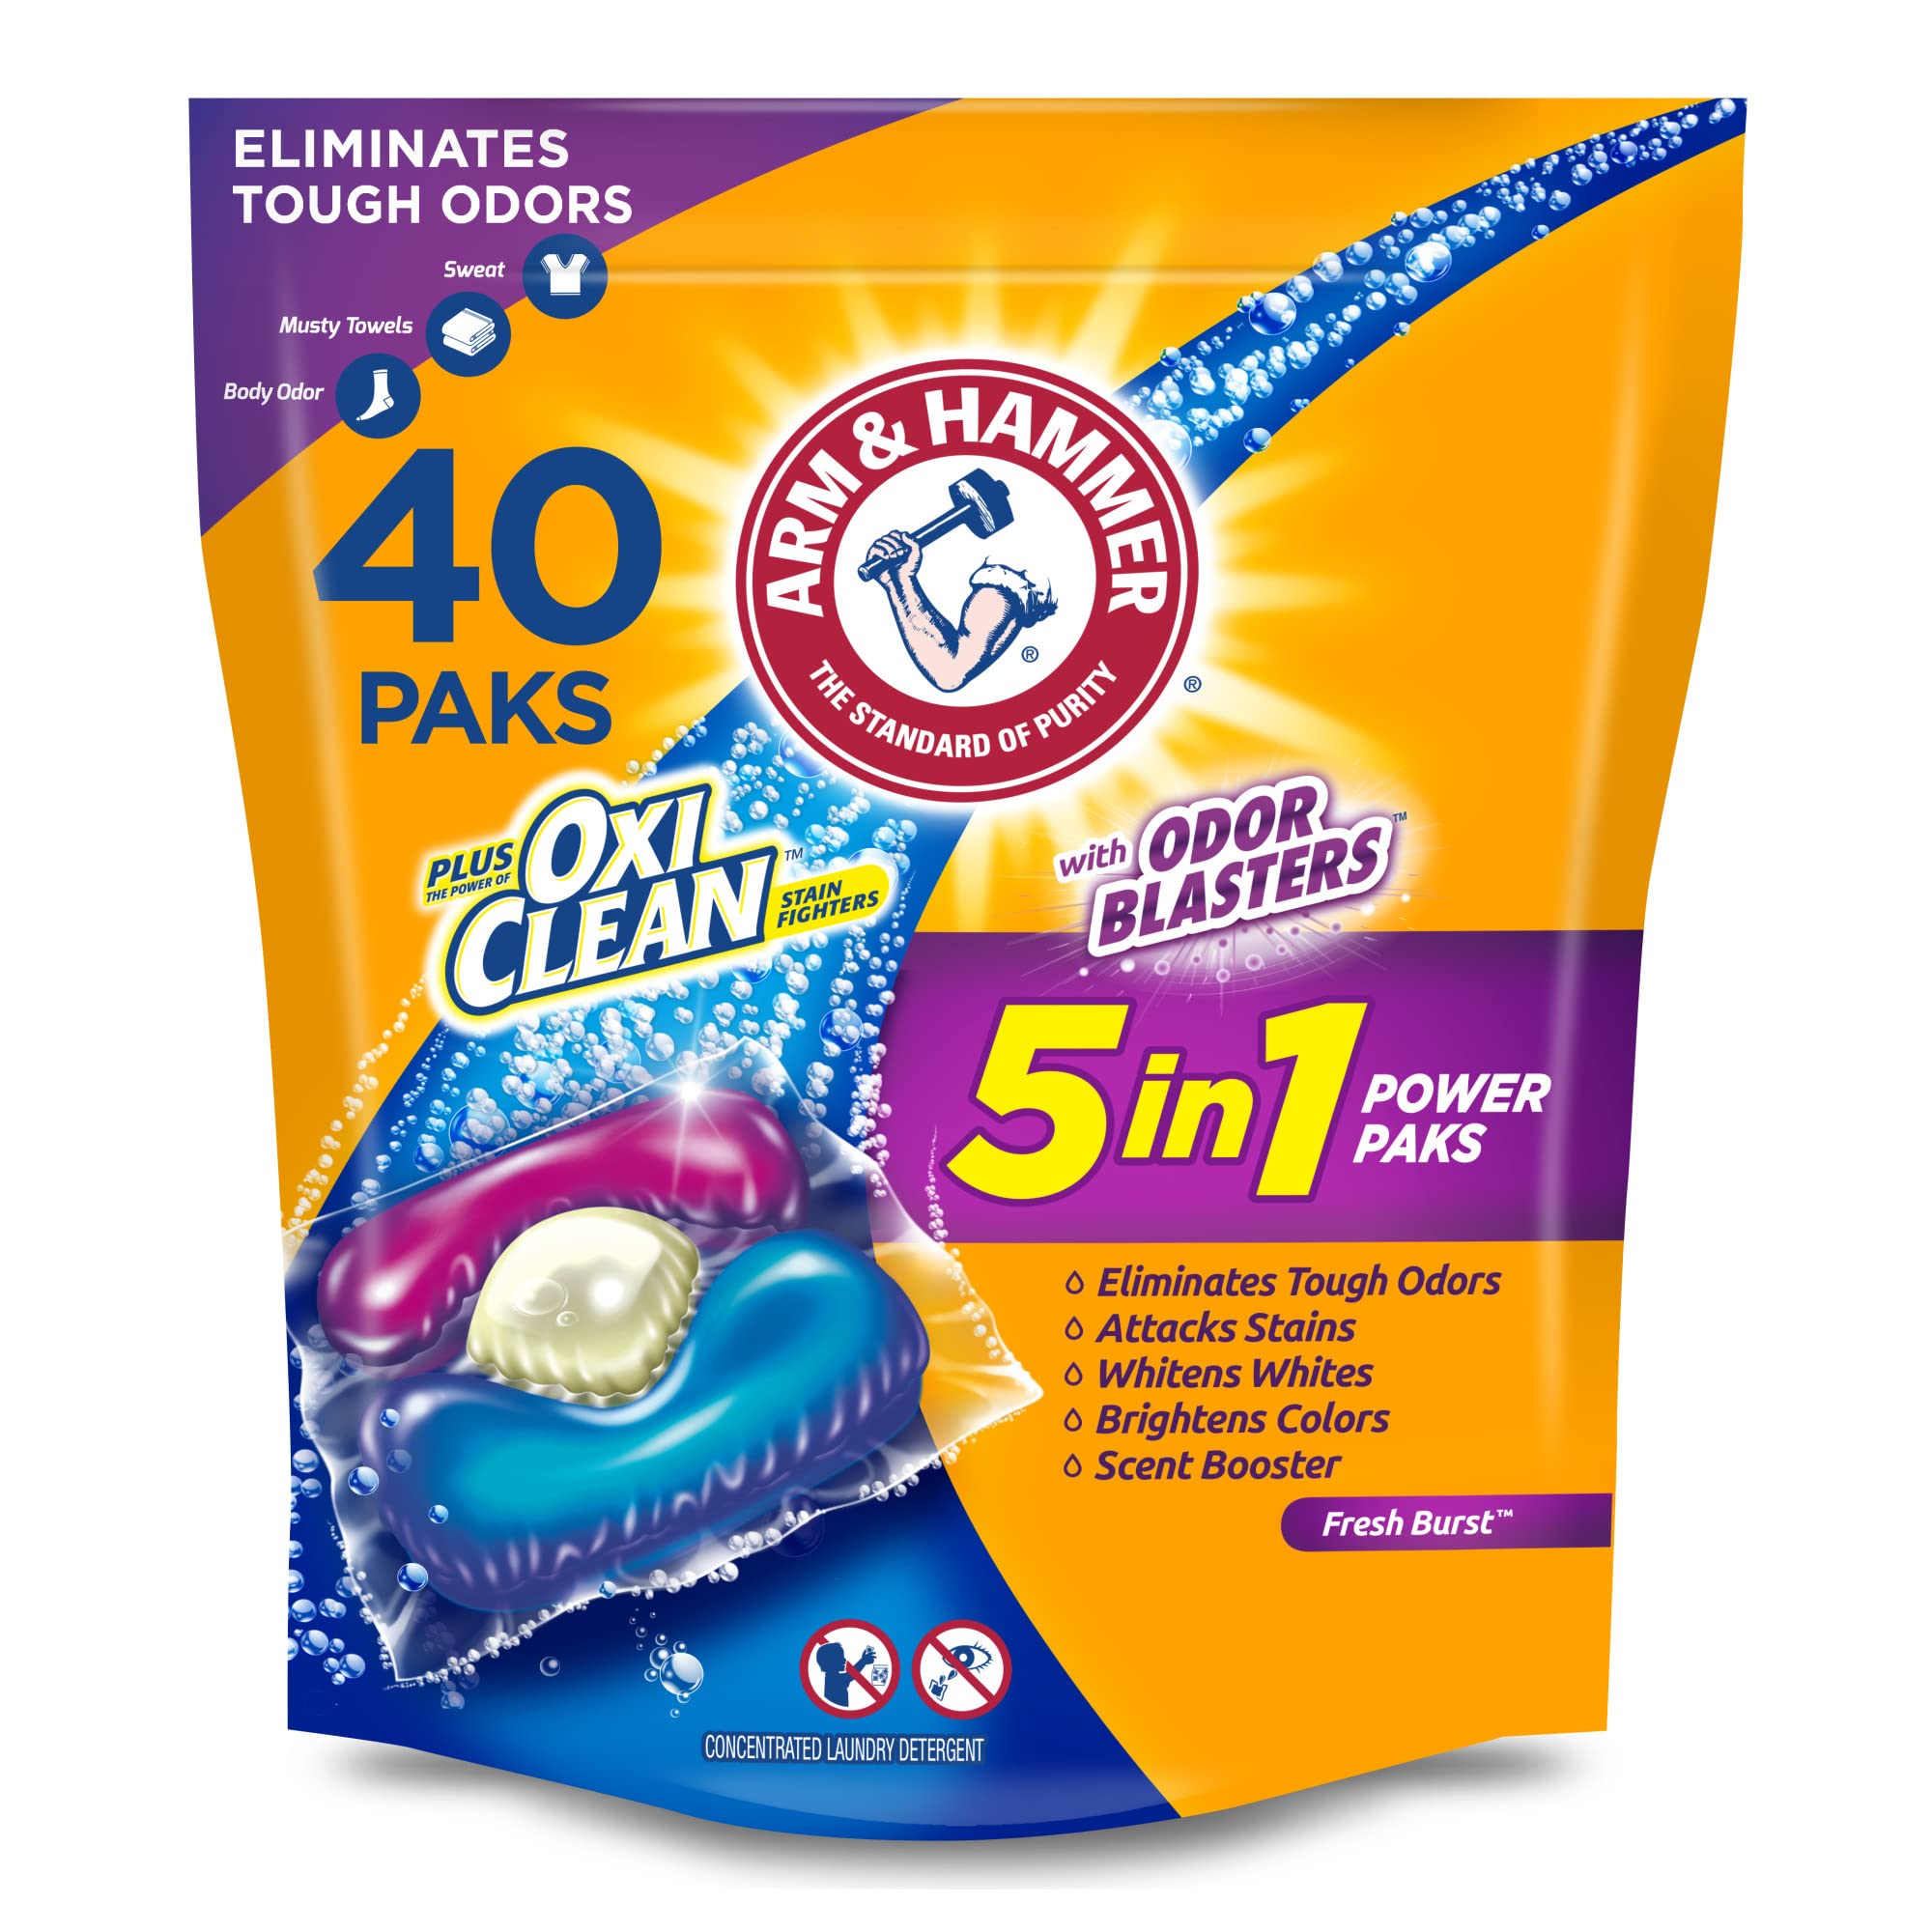 Book Cover Arm & Hammer Plus OxiClean With Odor Blasters LAUNDRY DETERGENT 5-IN-1 Power Paks, 40CT (Packaging may vary) Fresh 40 Count (Pack of 1)